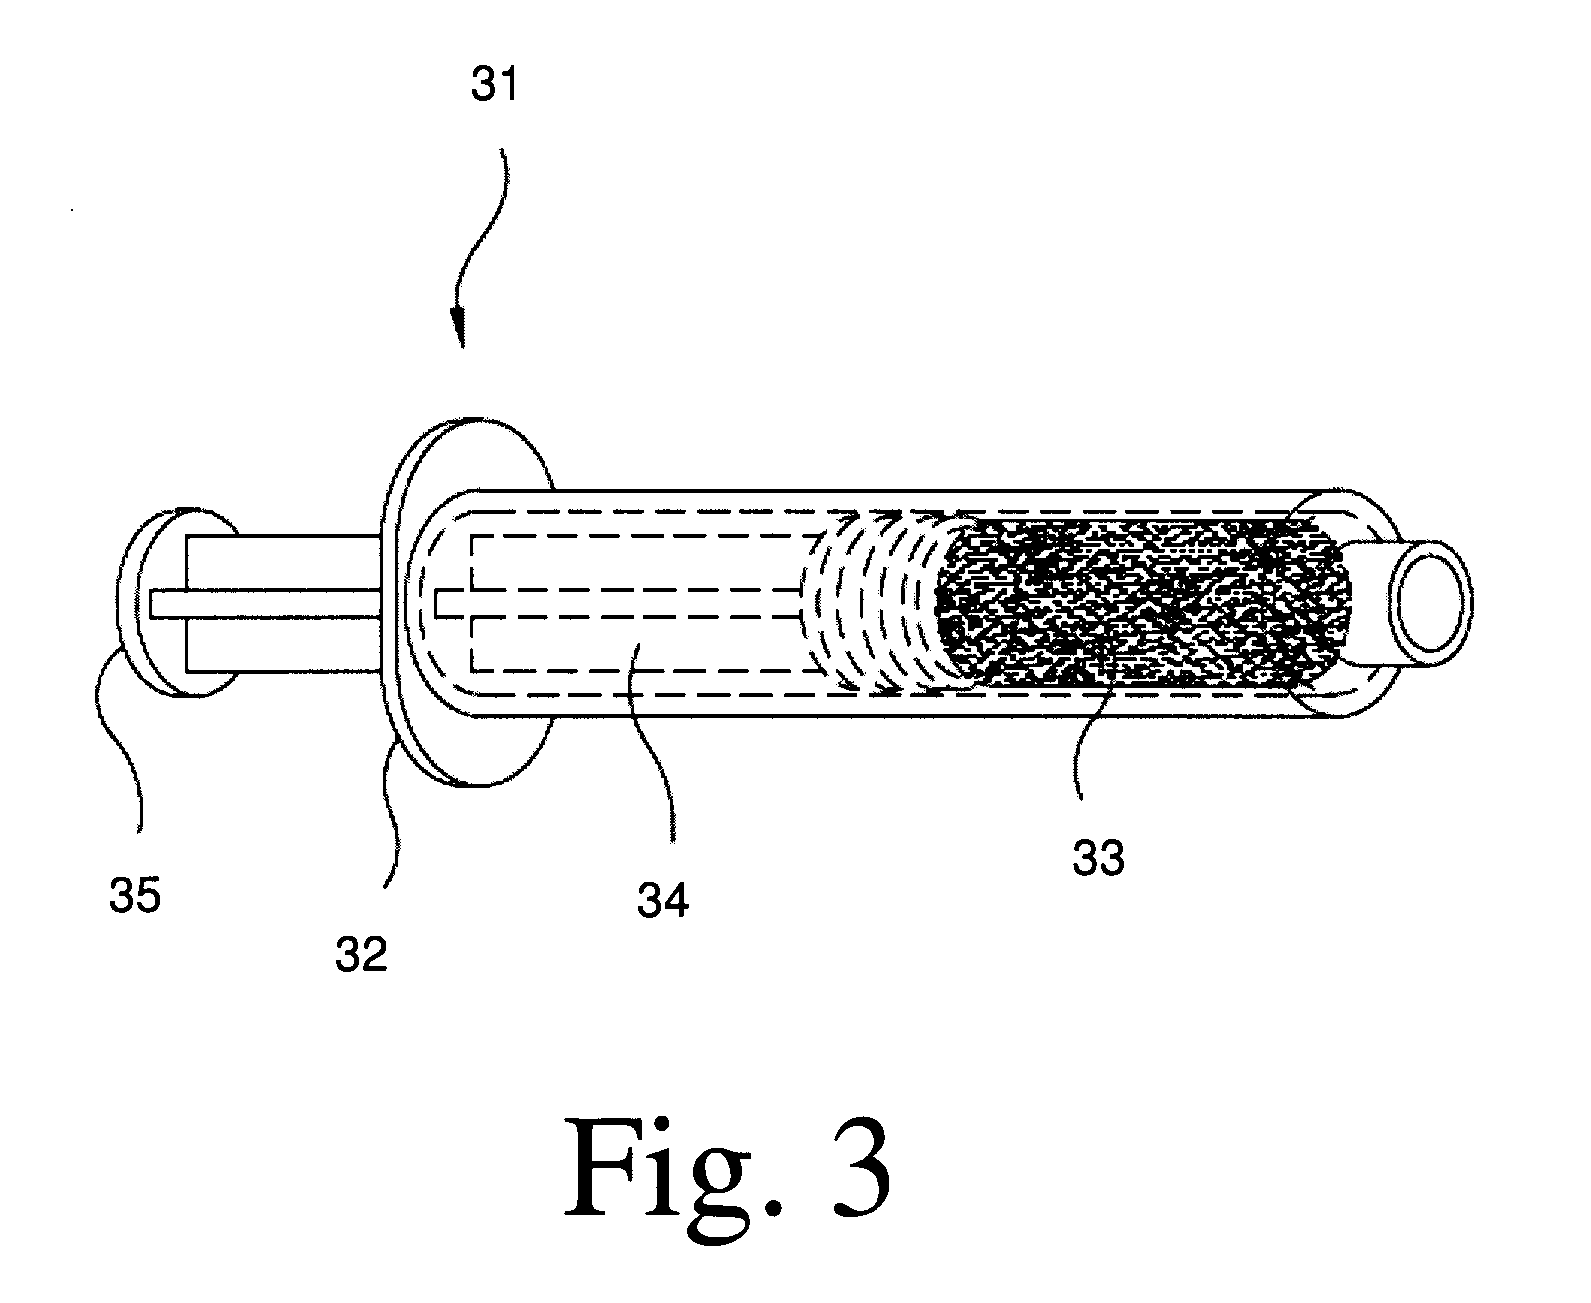 Malleable multi-component implants and materials therefor